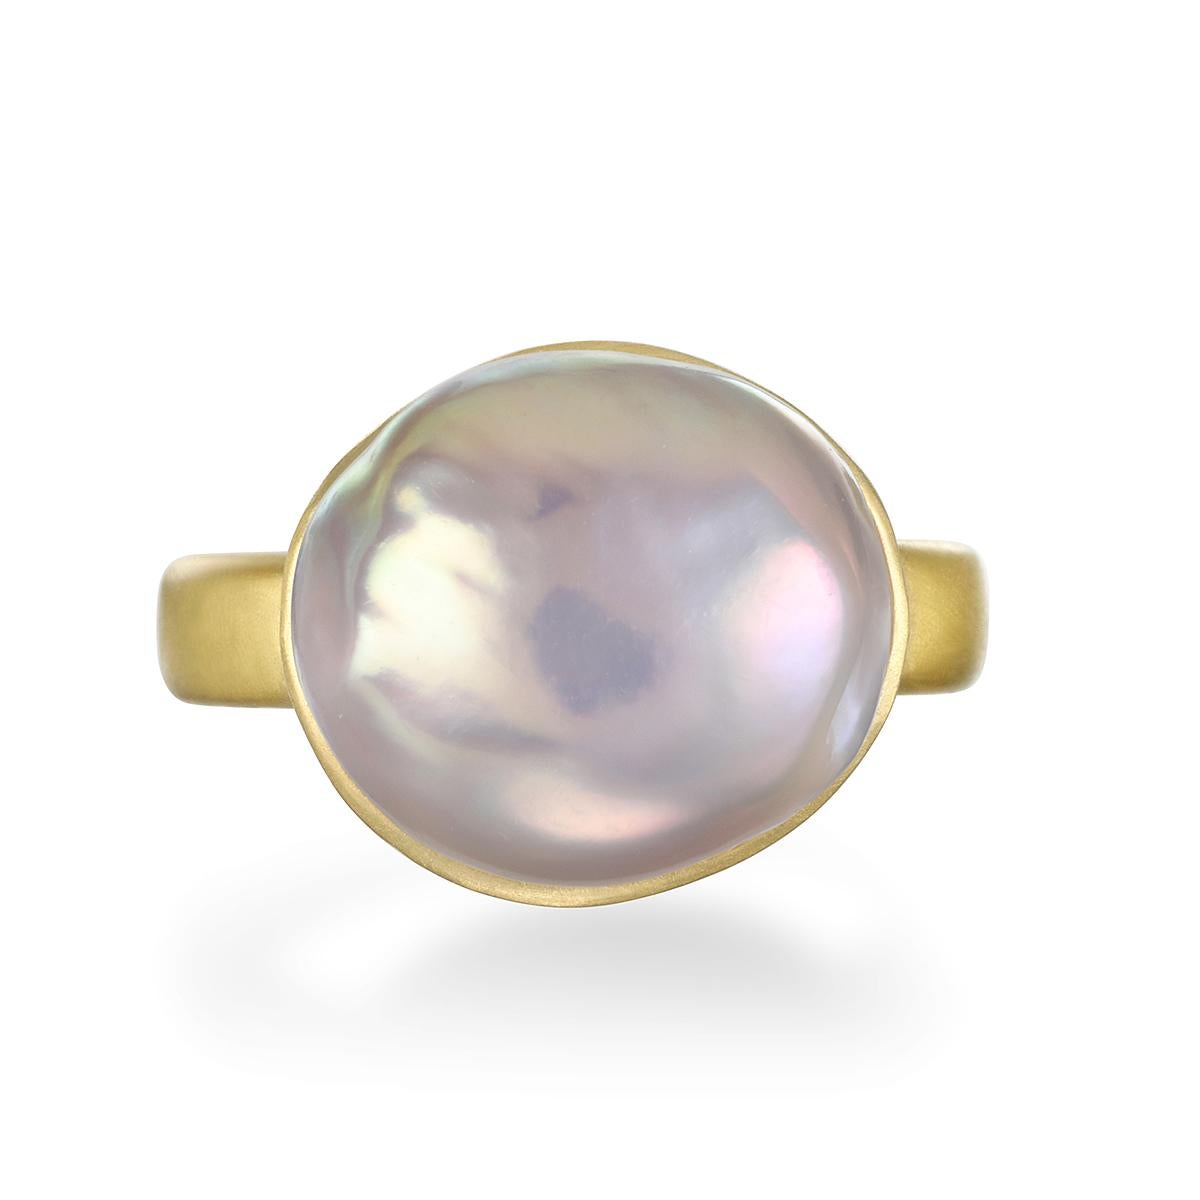 Faye Kim's 18 Karat Gold Pink Baroque Freshwater Pearl Ring is bezel set and highlights the classic beauty of pearls made wearable for today's contemporary styles.

Pearl: 15mm
Size: 6.5 (Can be resized)

Photos show variations on ring, all sold